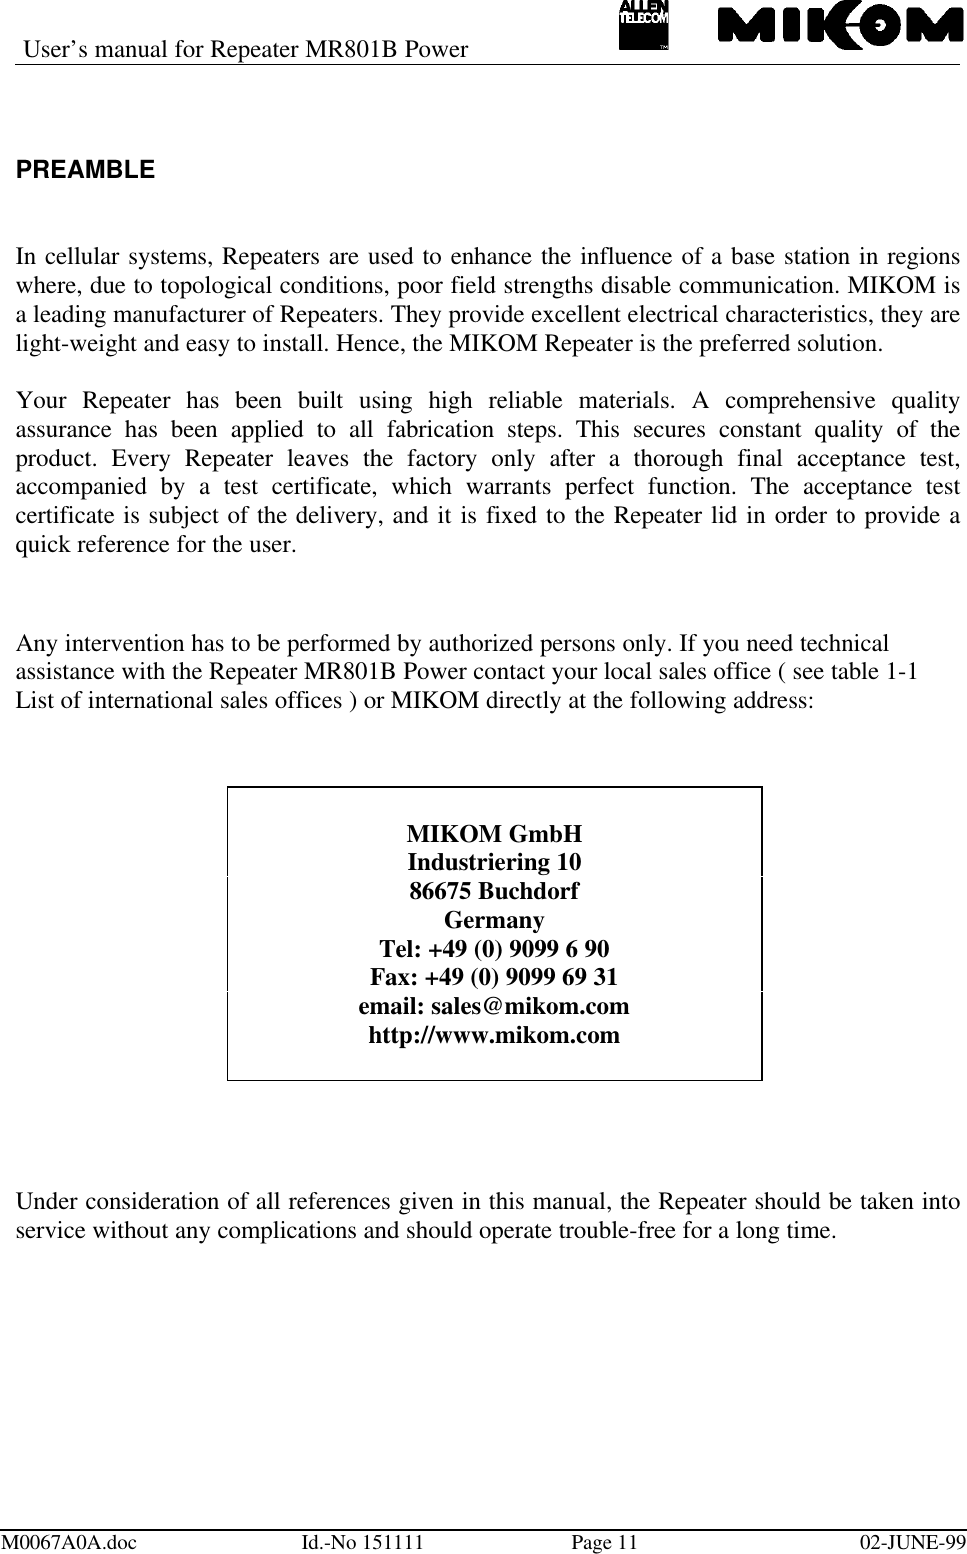 User’s manual for Repeater MR801B PowerM0067A0A.doc Id.-No 151111 Page 11 02-JUNE-99PREAMBLEIn cellular systems, Repeaters are used to enhance the influence of a base station in regionswhere, due to topological conditions, poor field strengths disable communication. MIKOM isa leading manufacturer of Repeaters. They provide excellent electrical characteristics, they arelight-weight and easy to install. Hence, the MIKOM Repeater is the preferred solution.Your Repeater has been built using high reliable materials. A comprehensive qualityassurance has been applied to all fabrication steps. This secures constant quality of theproduct. Every Repeater leaves the factory only after a thorough final acceptance test,accompanied by a test certificate, which warrants perfect function. The acceptance testcertificate is subject of the delivery, and it is fixed to the Repeater lid in order to provide aquick reference for the user.Any intervention has to be performed by authorized persons only. If you need technicalassistance with the Repeater MR801B Power contact your local sales office ( see table 1-1List of international sales offices ) or MIKOM directly at the following address:Under consideration of all references given in this manual, the Repeater should be taken intoservice without any complications and should operate trouble-free for a long time.MIKOM GmbHIndustriering 1086675 BuchdorfGermanyTel: +49 (0) 9099 6 90Fax: +49 (0) 9099 69 31email: sales@mikom.comhttp://www.mikom.com